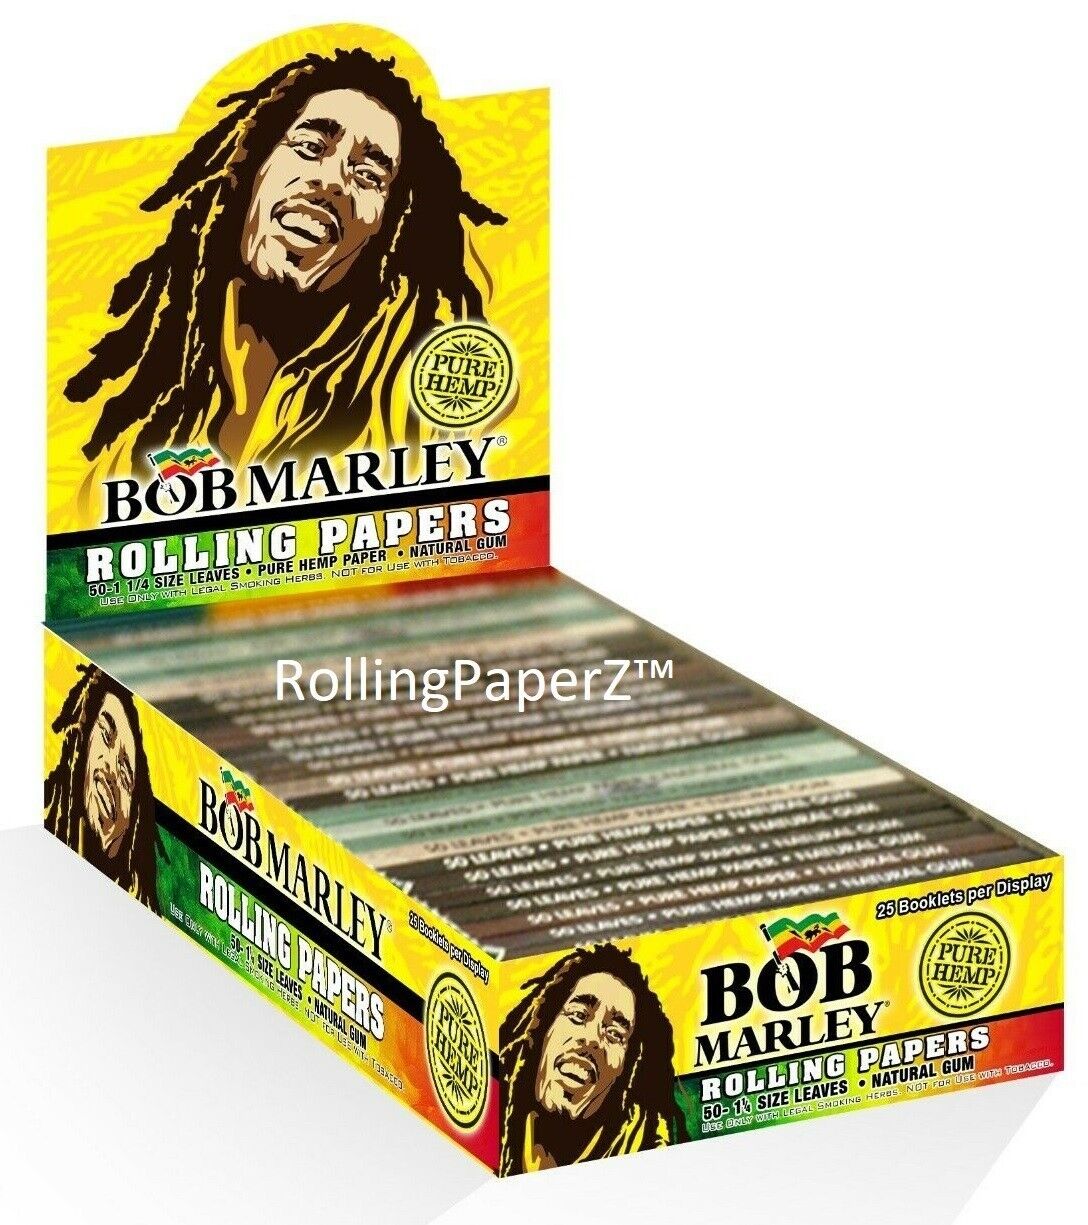 FIVE PACKS - Bob Marley 1 1/4 SIZE Hemp Rolling Papers/ 50 SHEETS PER PACK